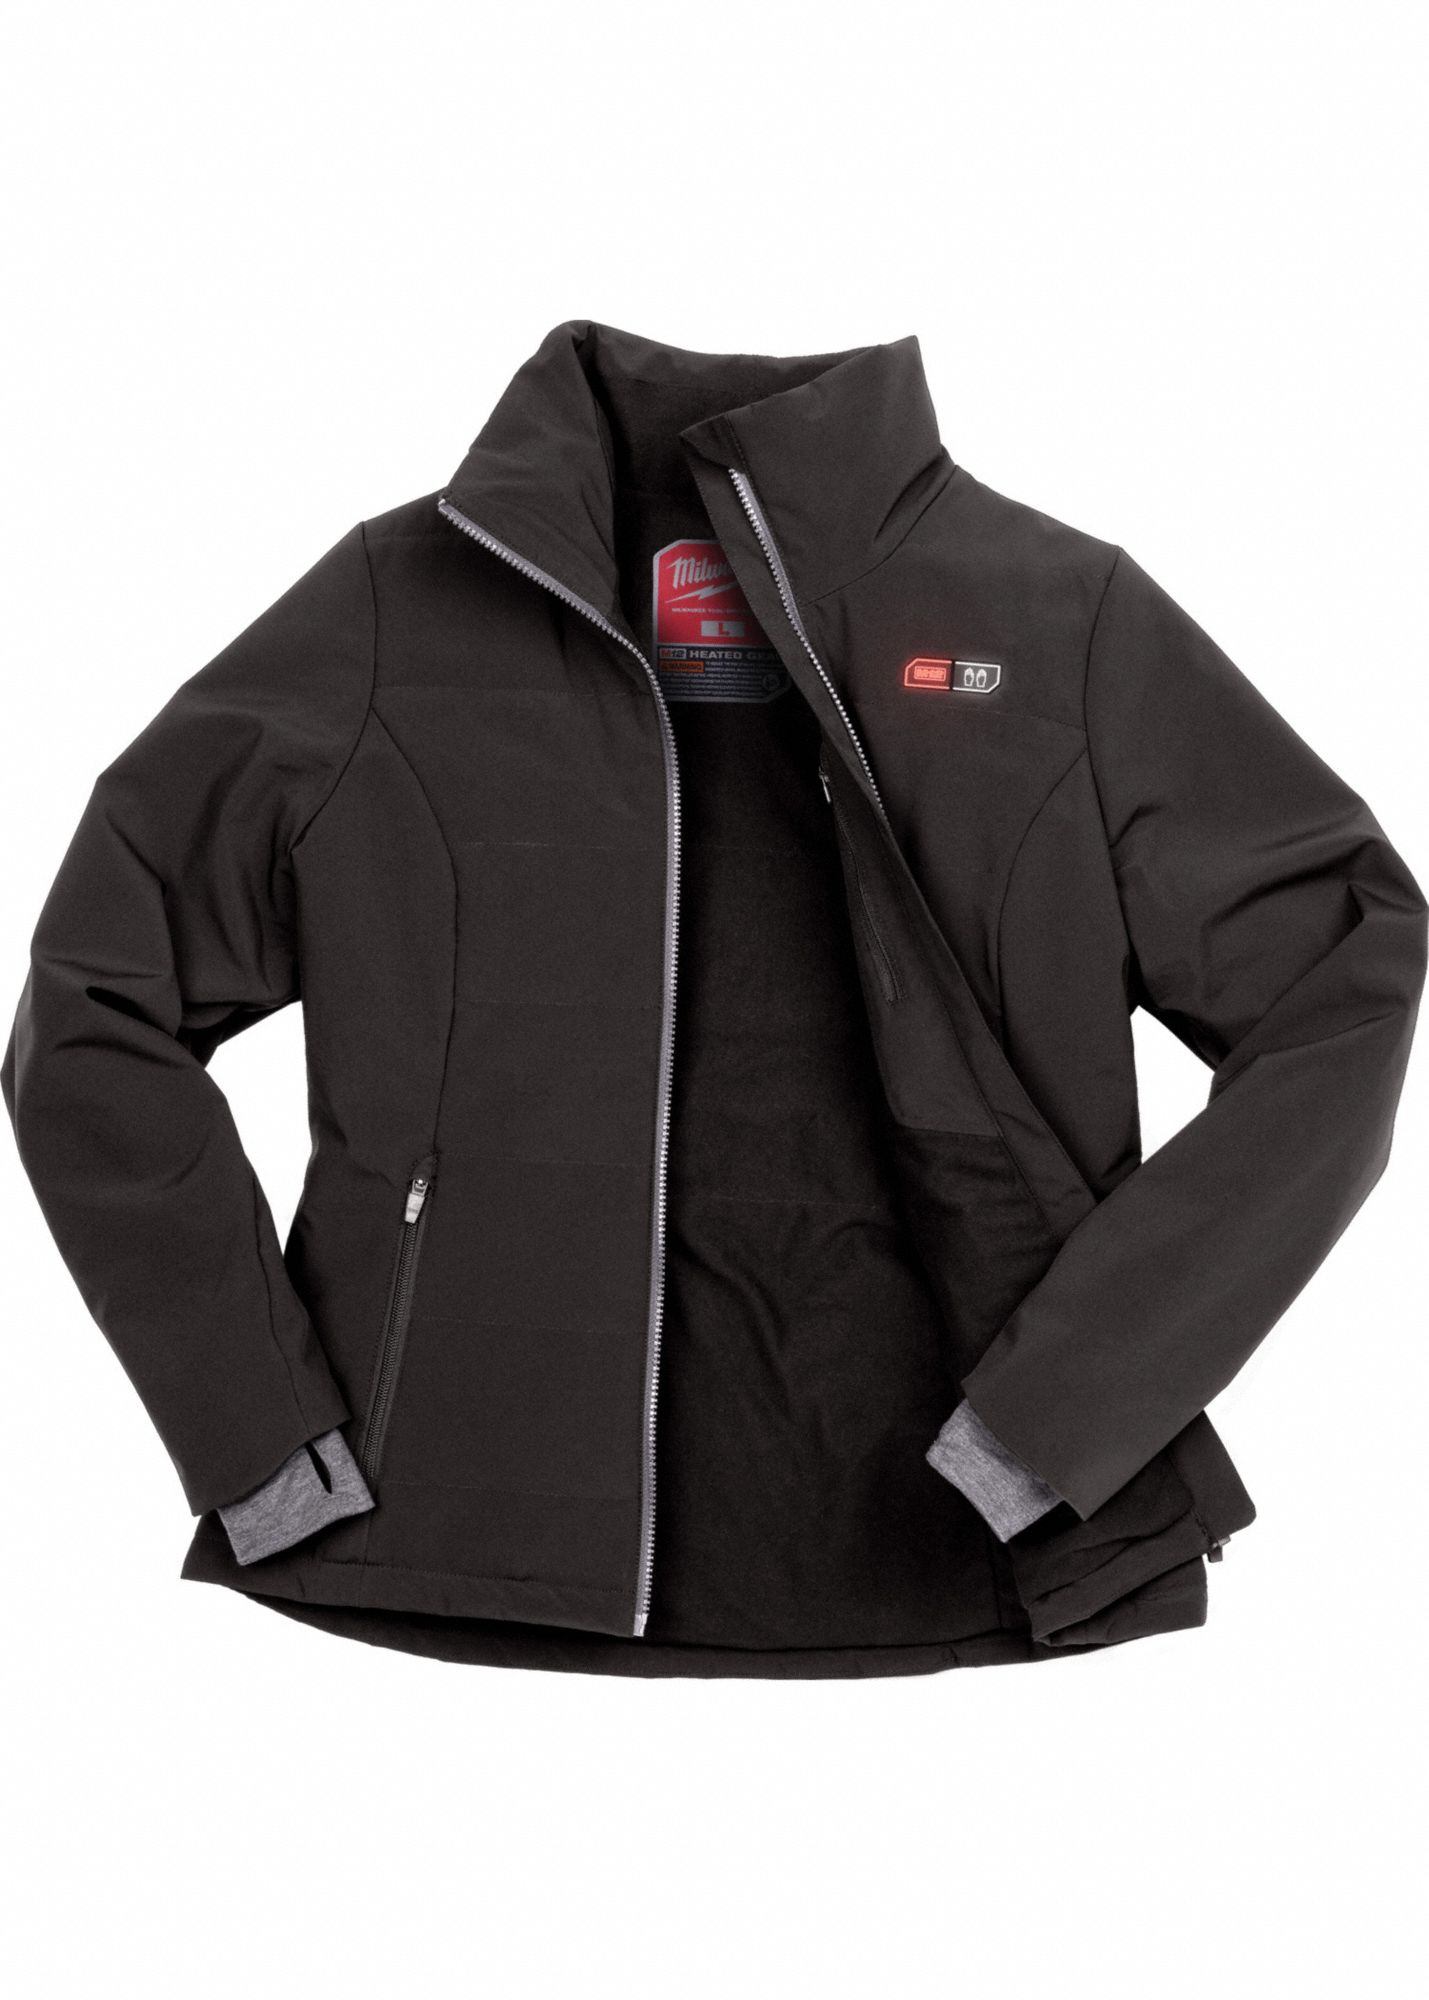 MILWAUKEE Women's Black Heated Jacket Kit, Size M, Battery Included Yes 49EH33231B21M